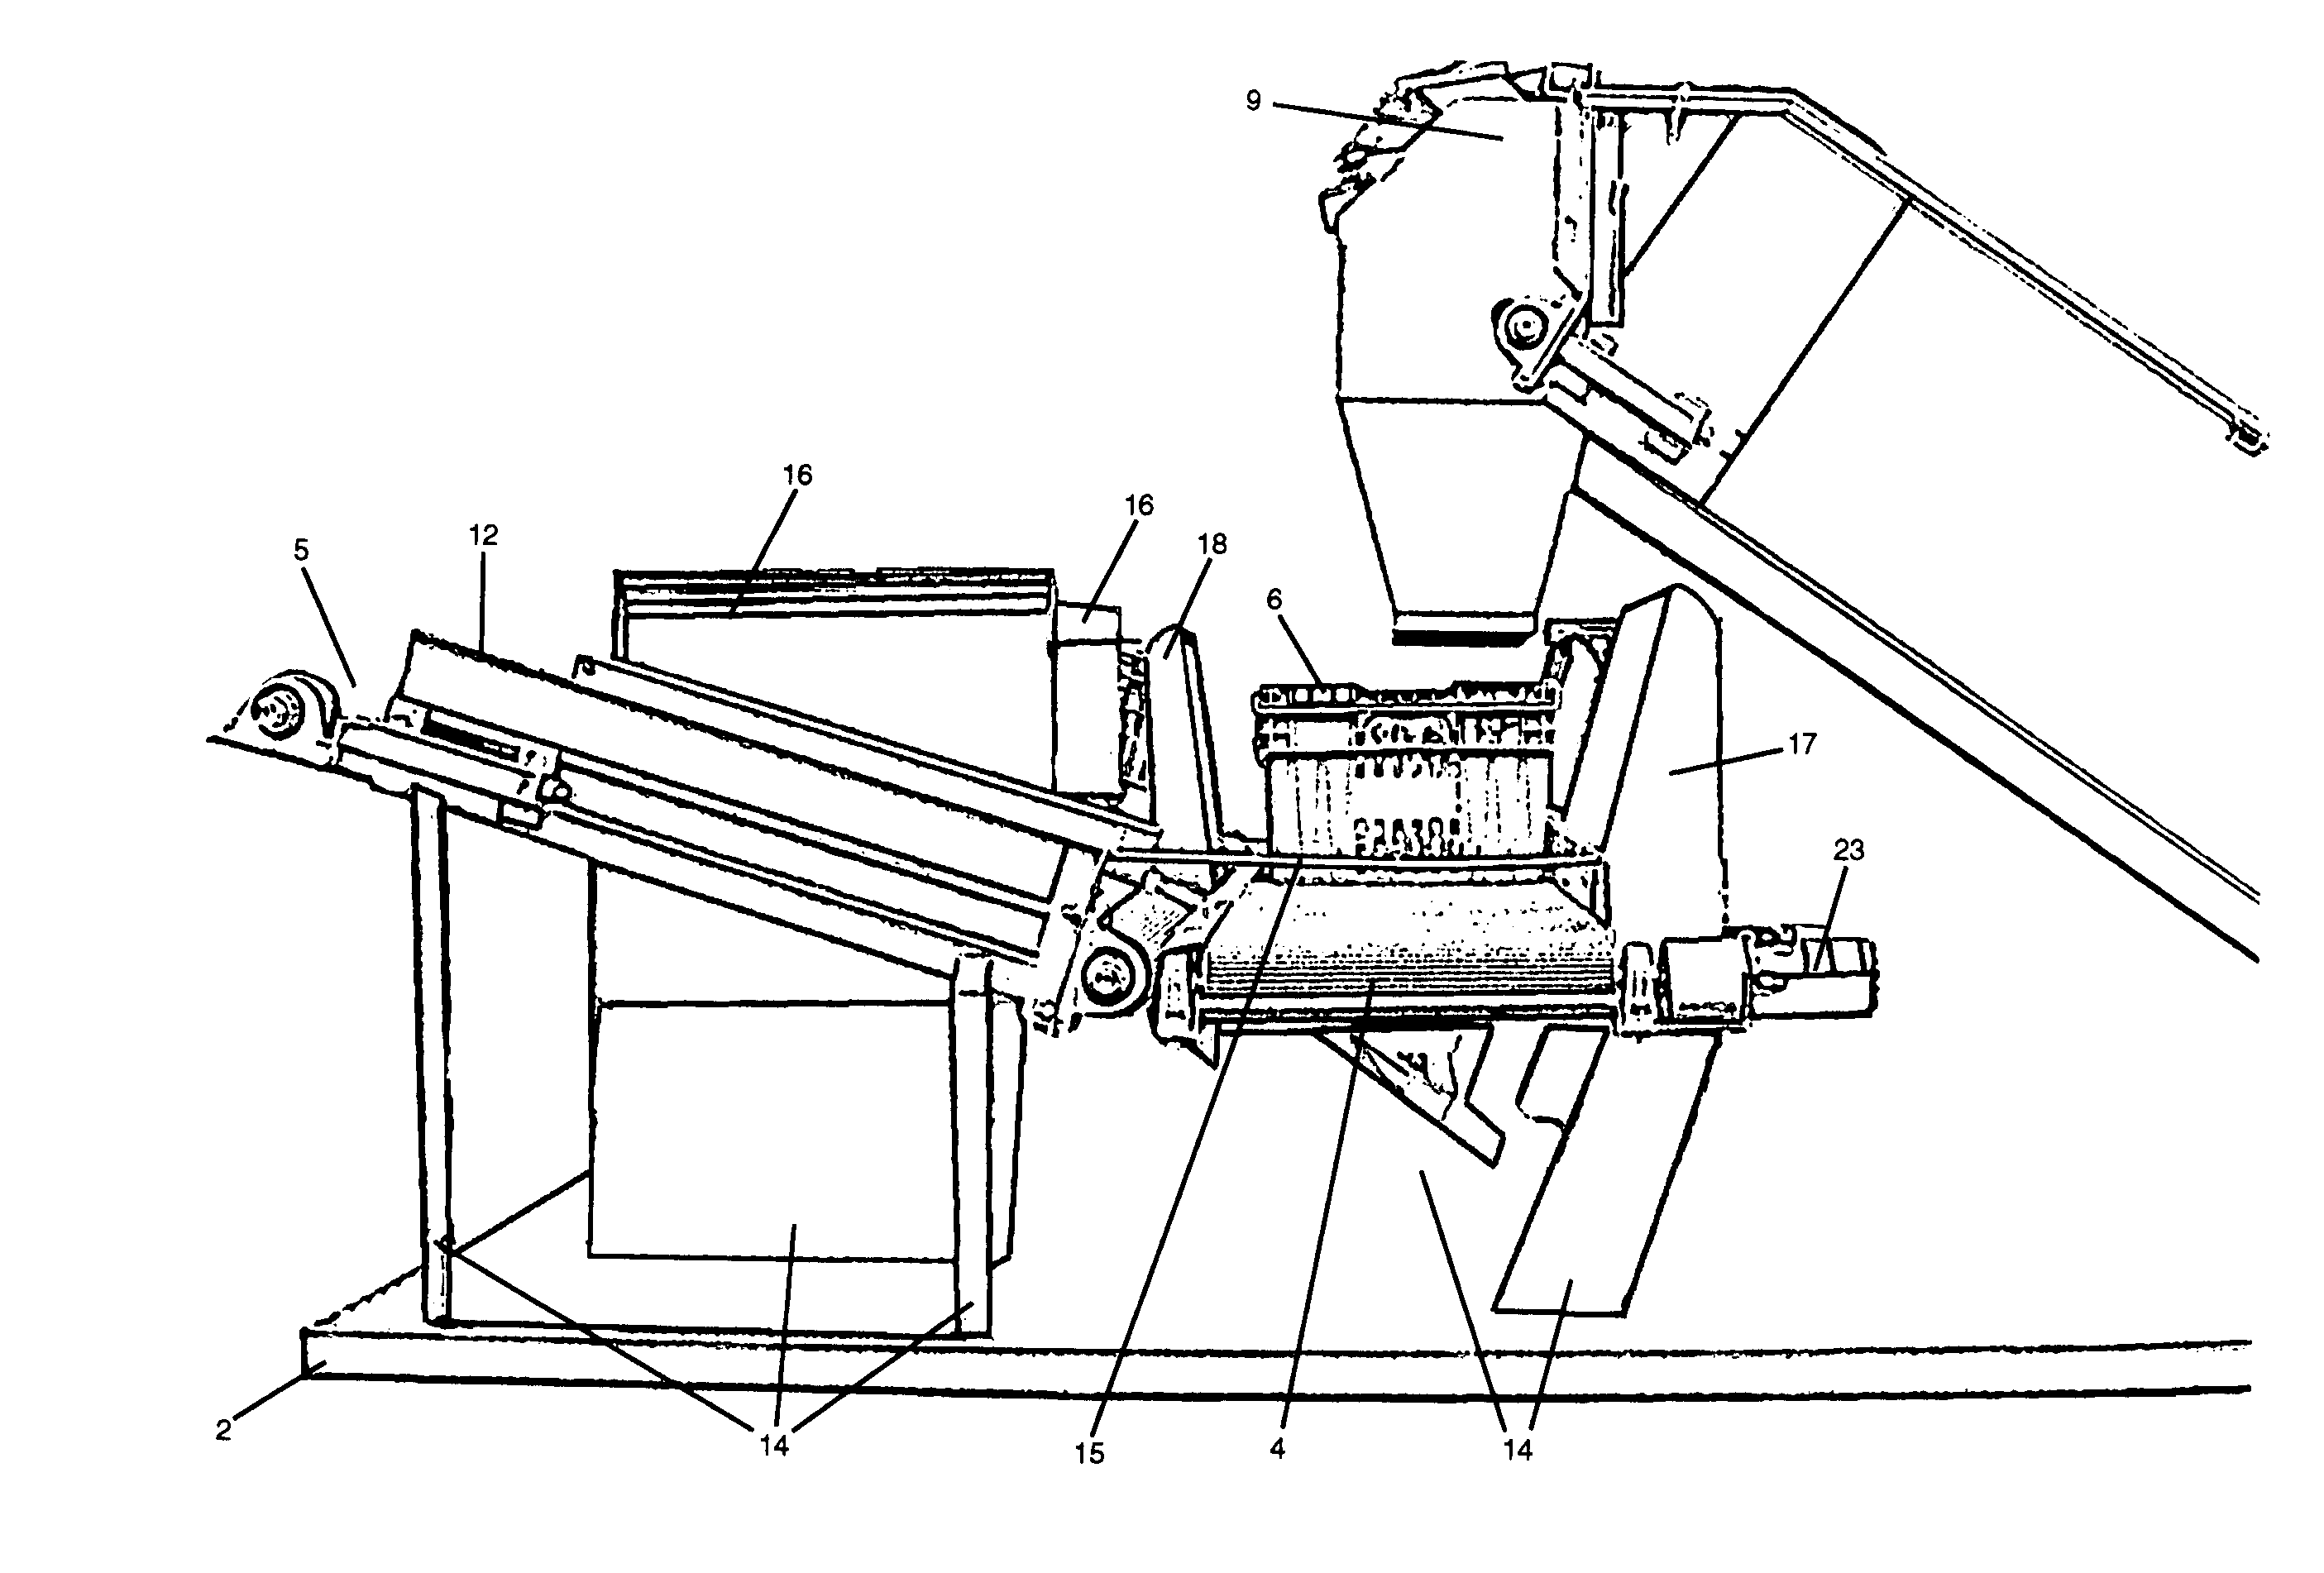 Tote conveying apparatus and method